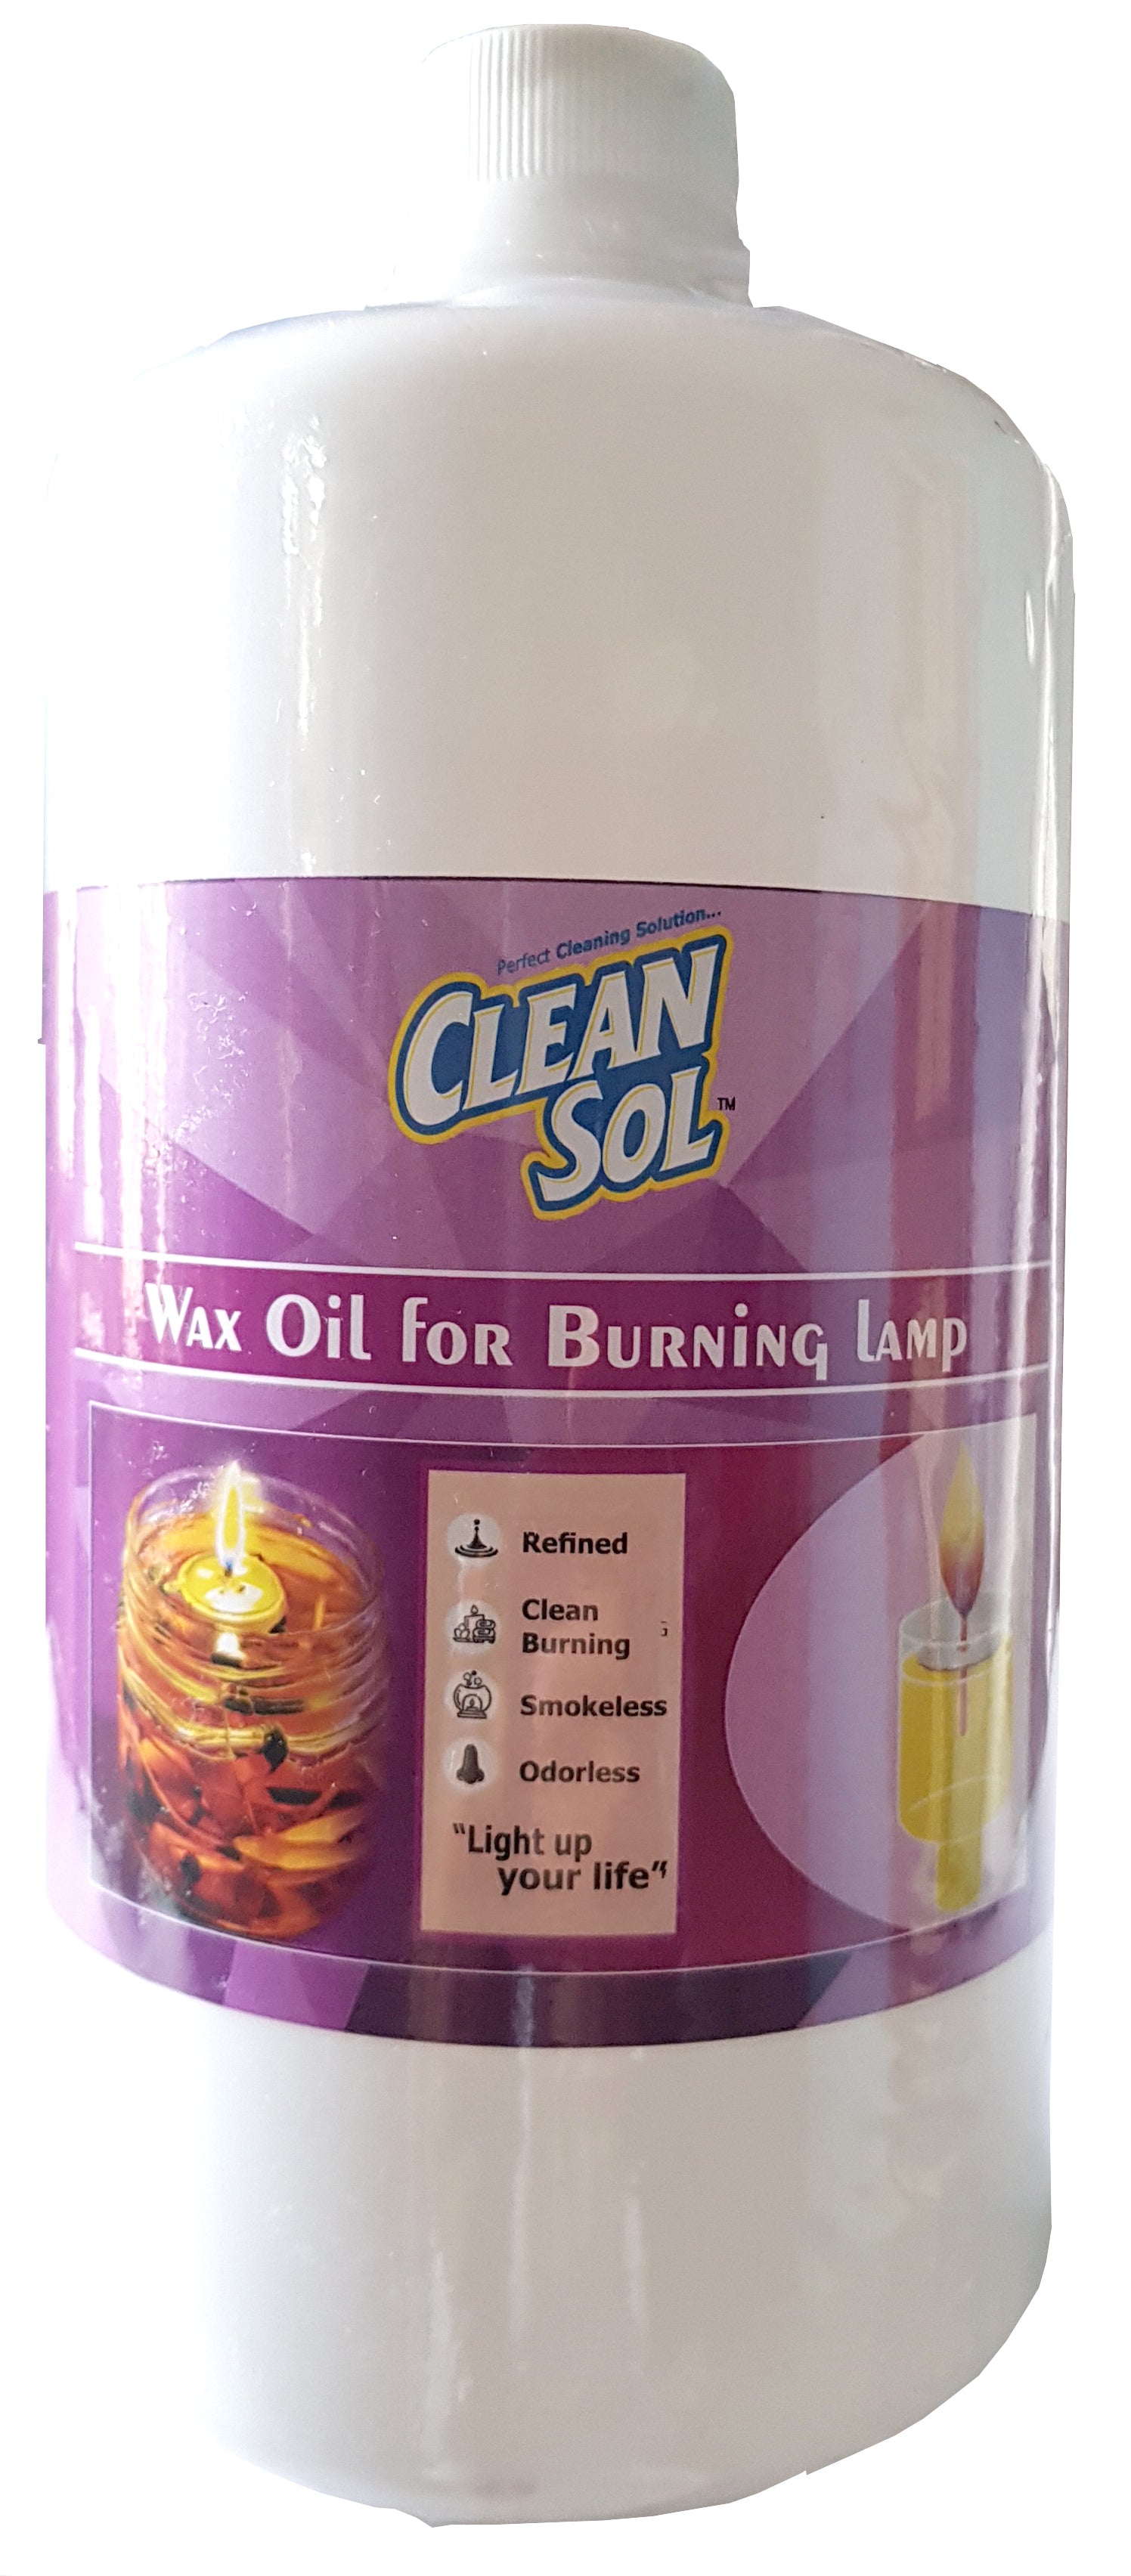 Cleansol Wax Oil for The Floating Wicks